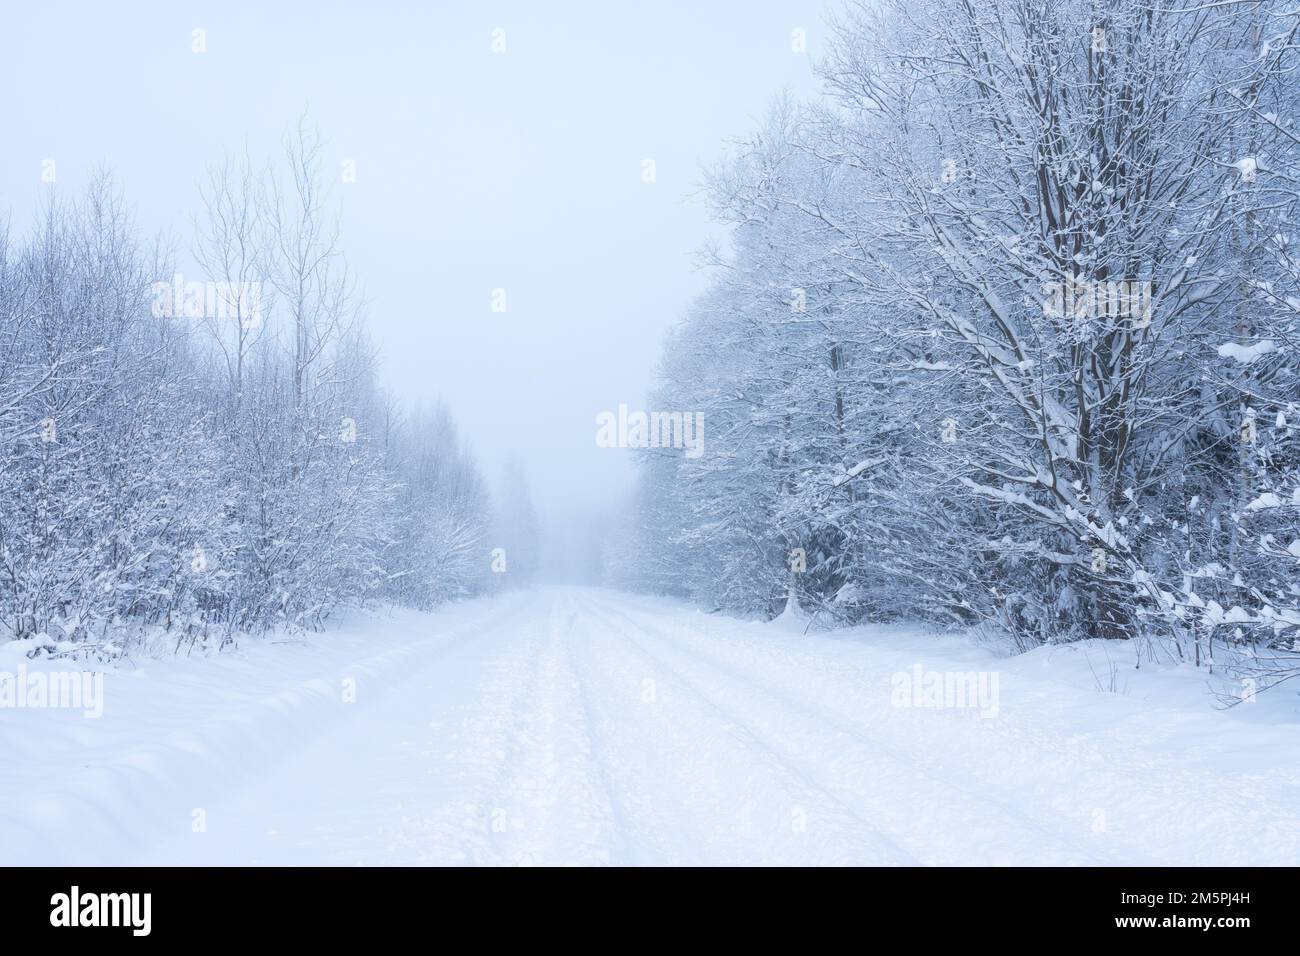 A snowy road leading through a wintry woodland on a cold day in rural Estonia, Northern Europe Stock Photo